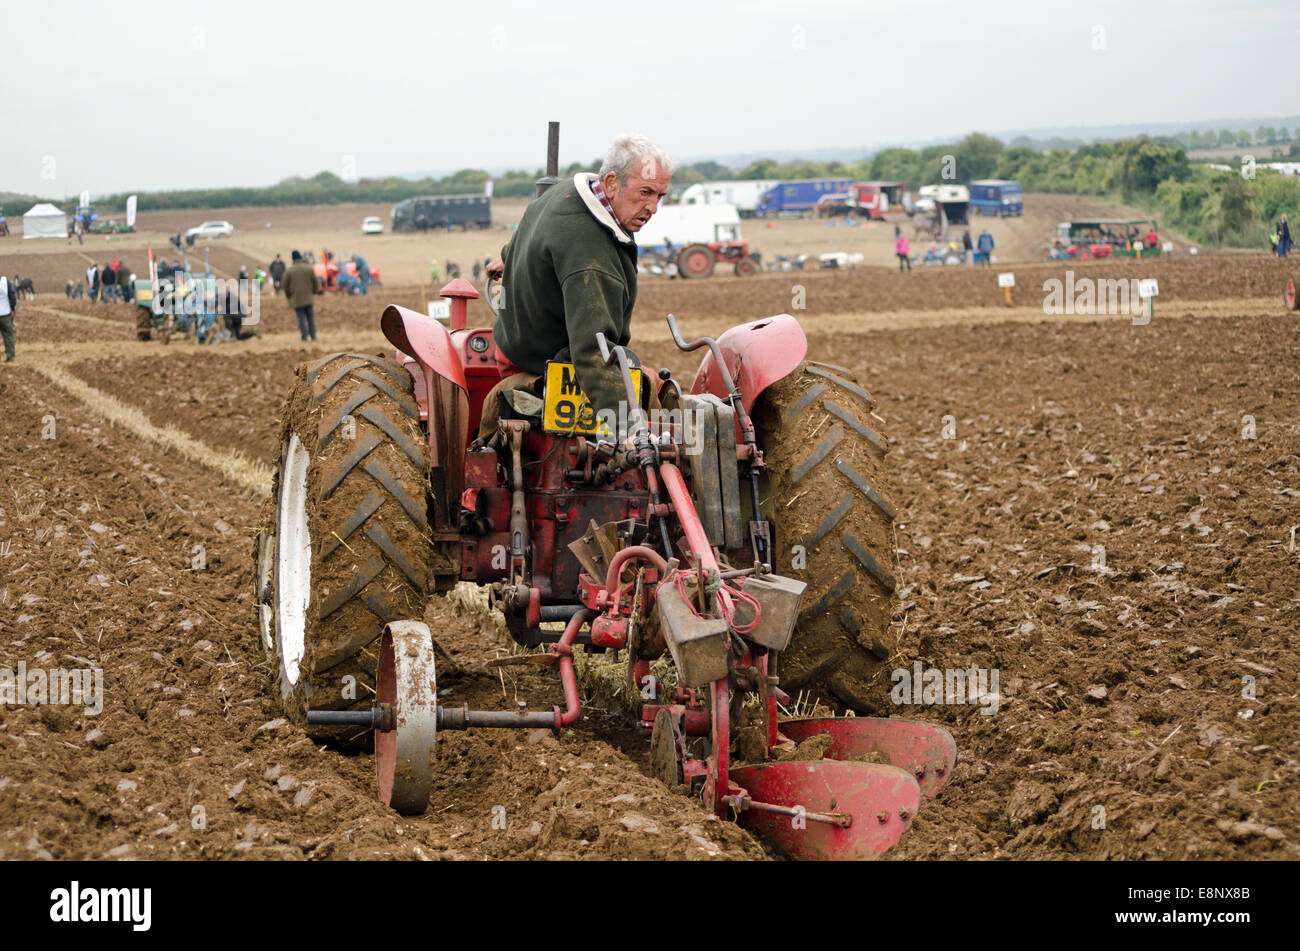 BASINGSTOKE, UK  OCTOBER 12, 2014: A competitor adjusting his equipment during the British National Ploughing Championship. Stock Photo